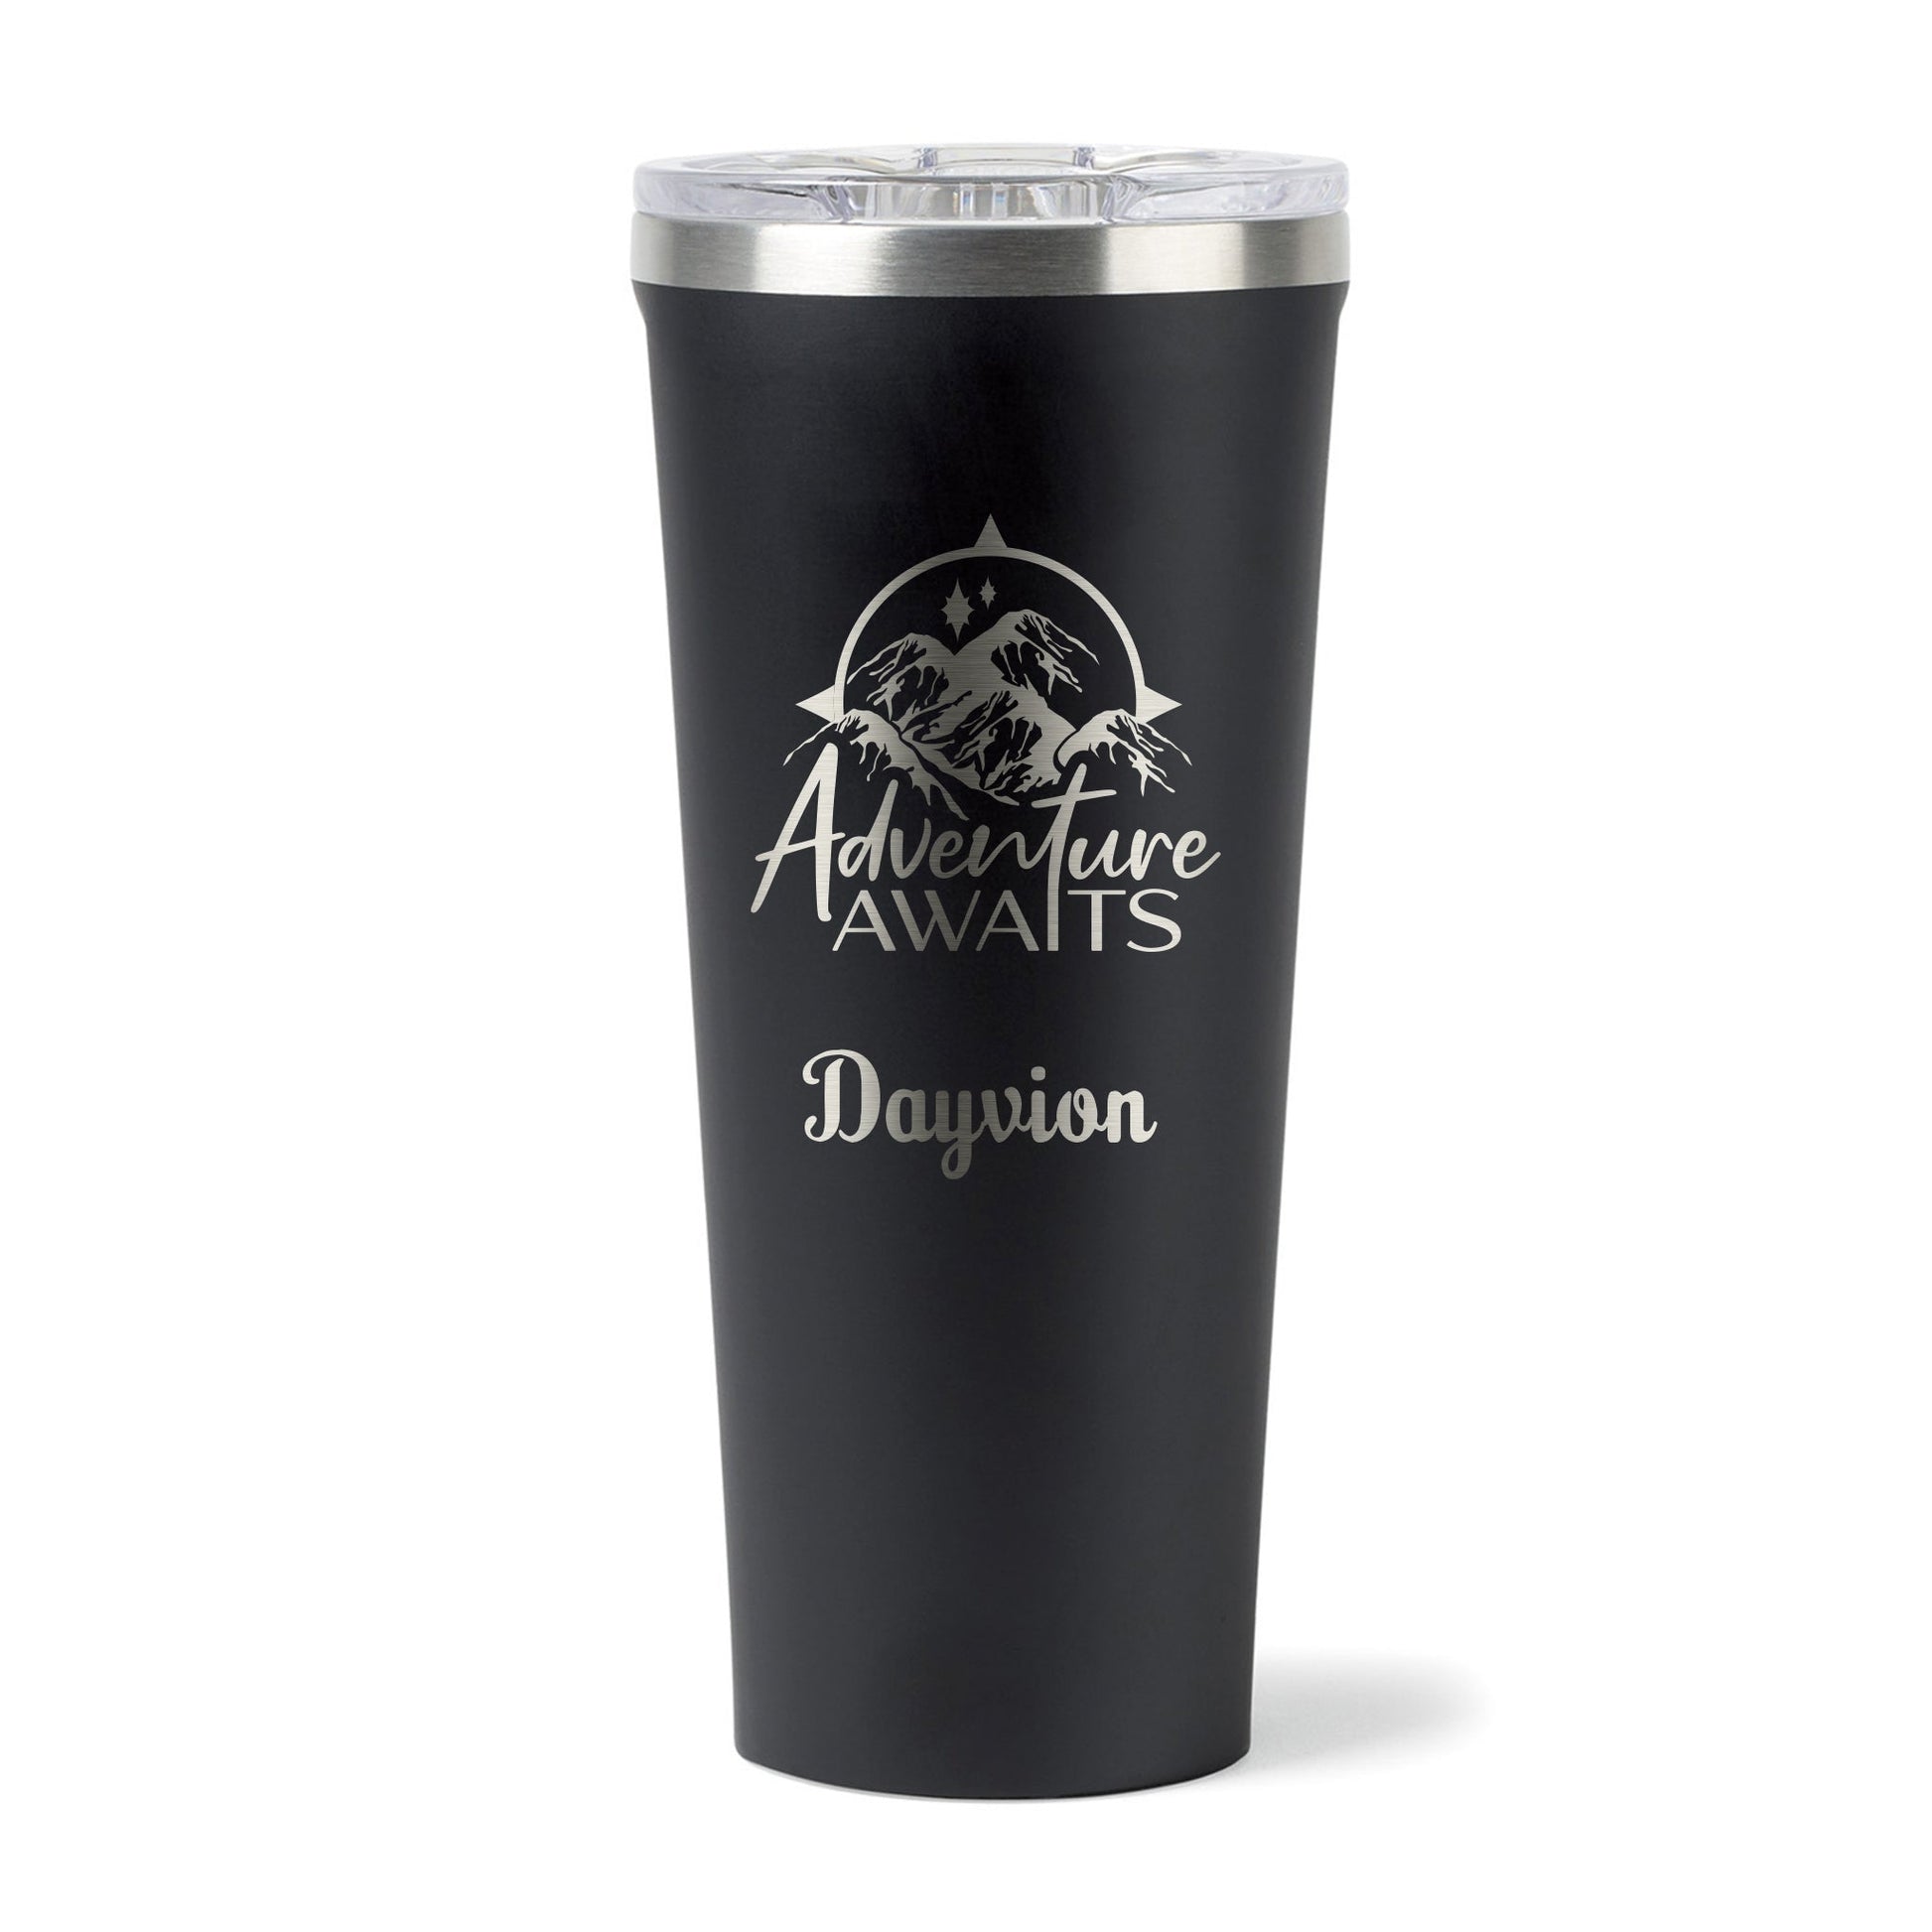 Corkcicle® Cold Cup Tumbler with Straw 24-Oz. - Laser-Engraved  Personalization Available